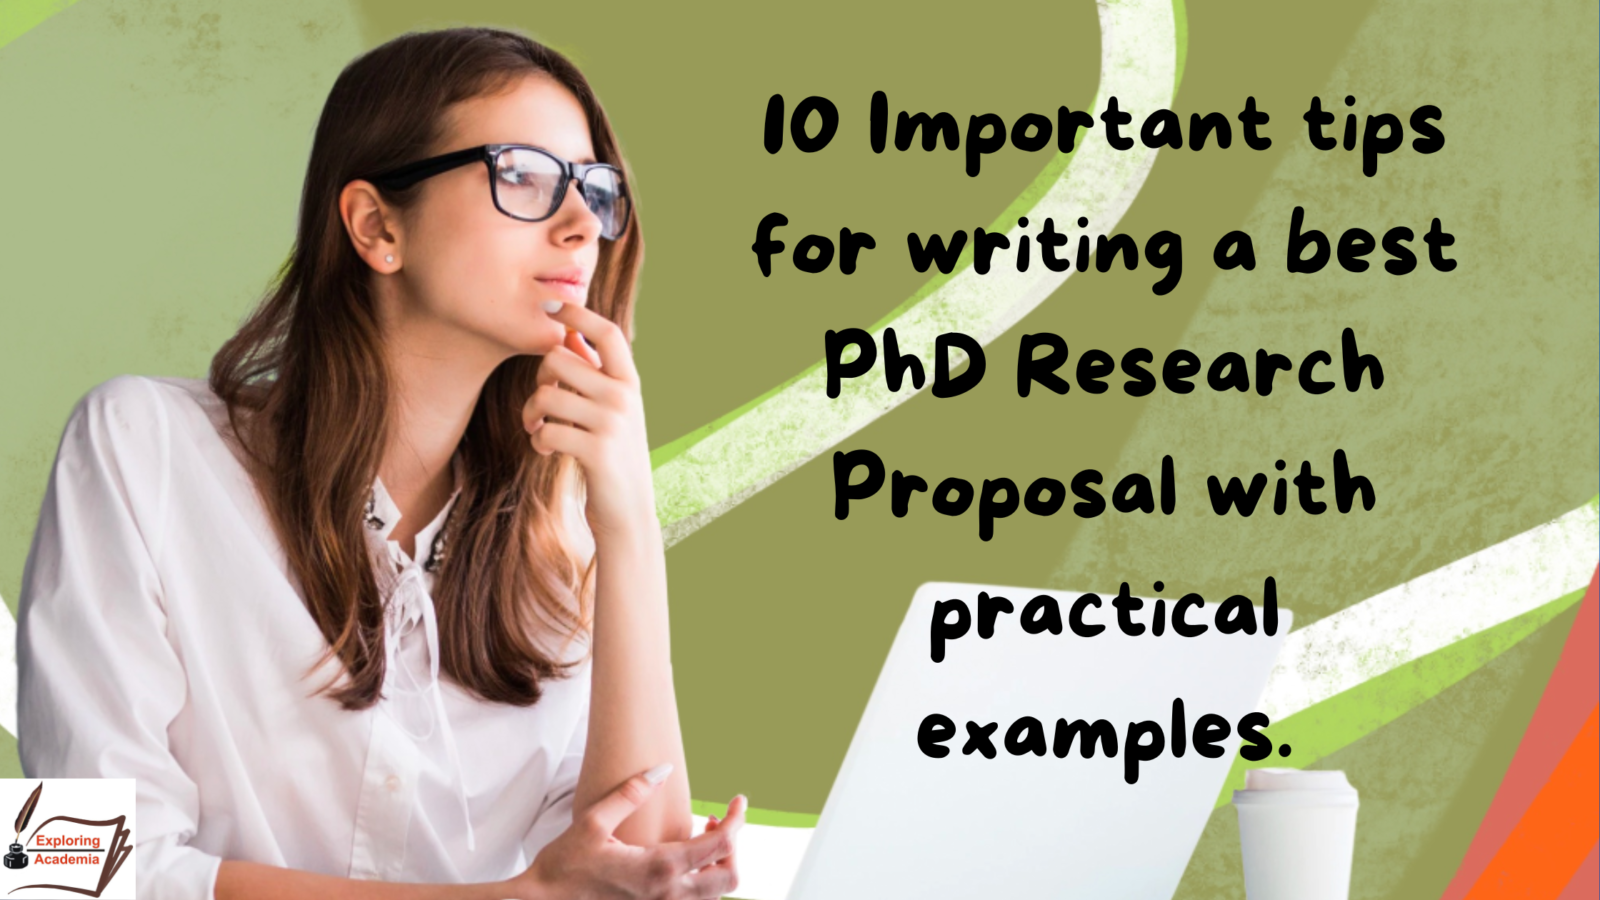 10 Important tips for writing a quality PhD Research Proposal with practical examples.